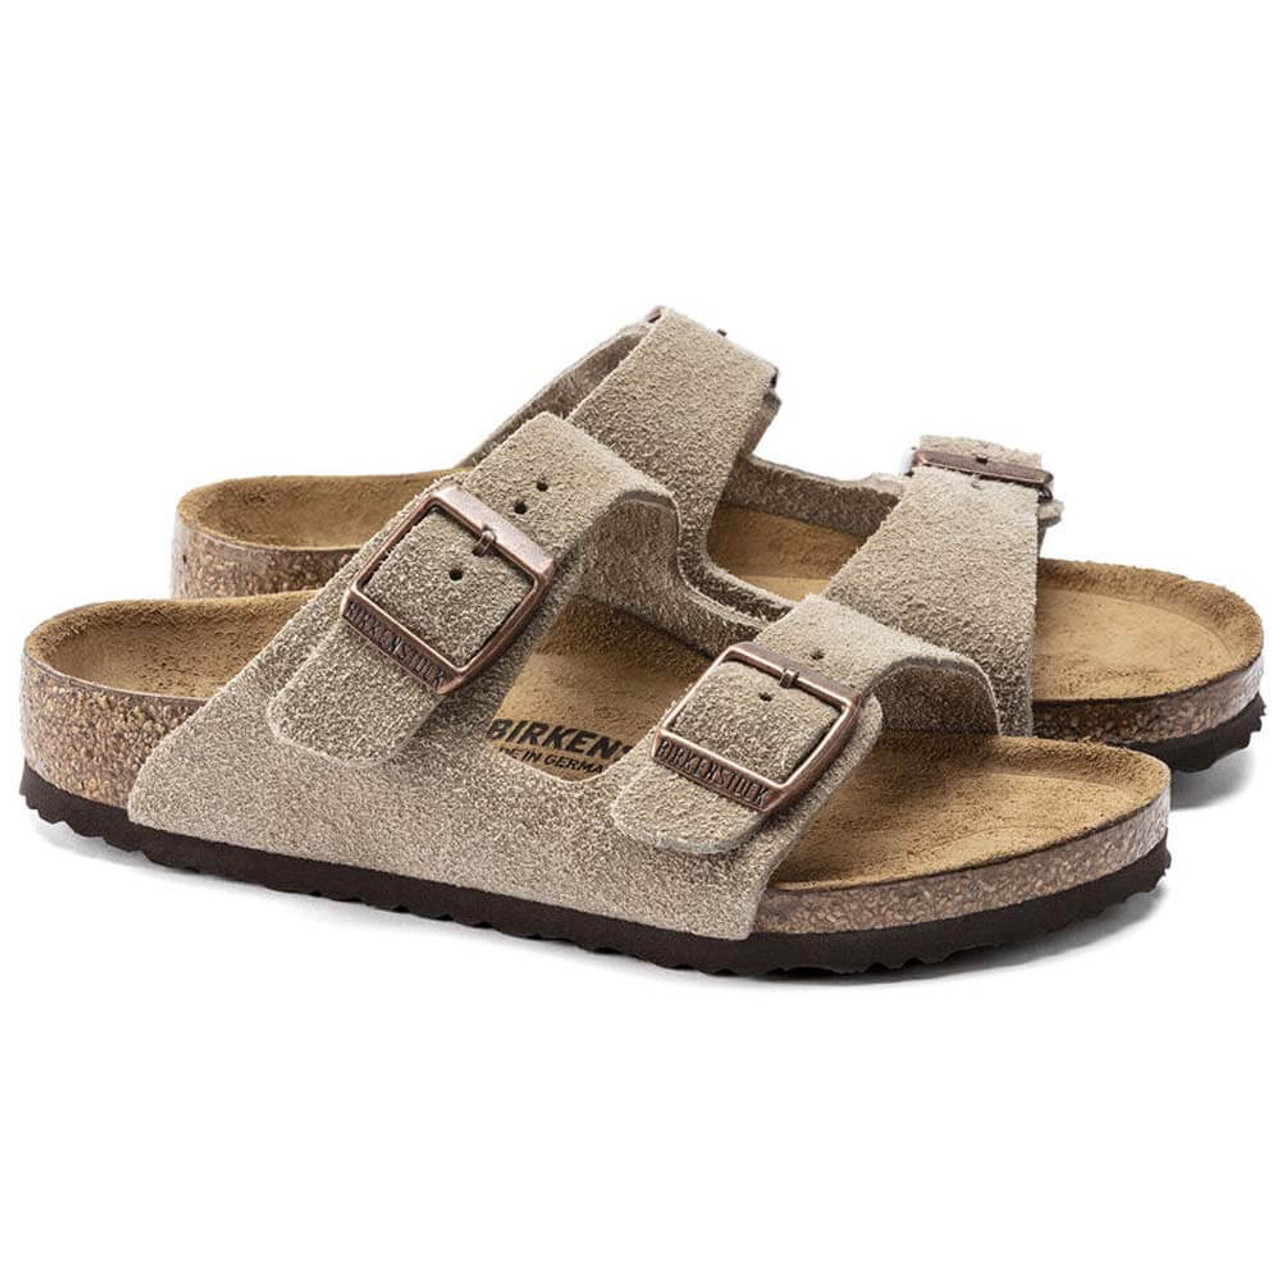 BIRKENSTOCK Arizona Two Strap Sandals Suede Leather Taupe - Women's Sandals